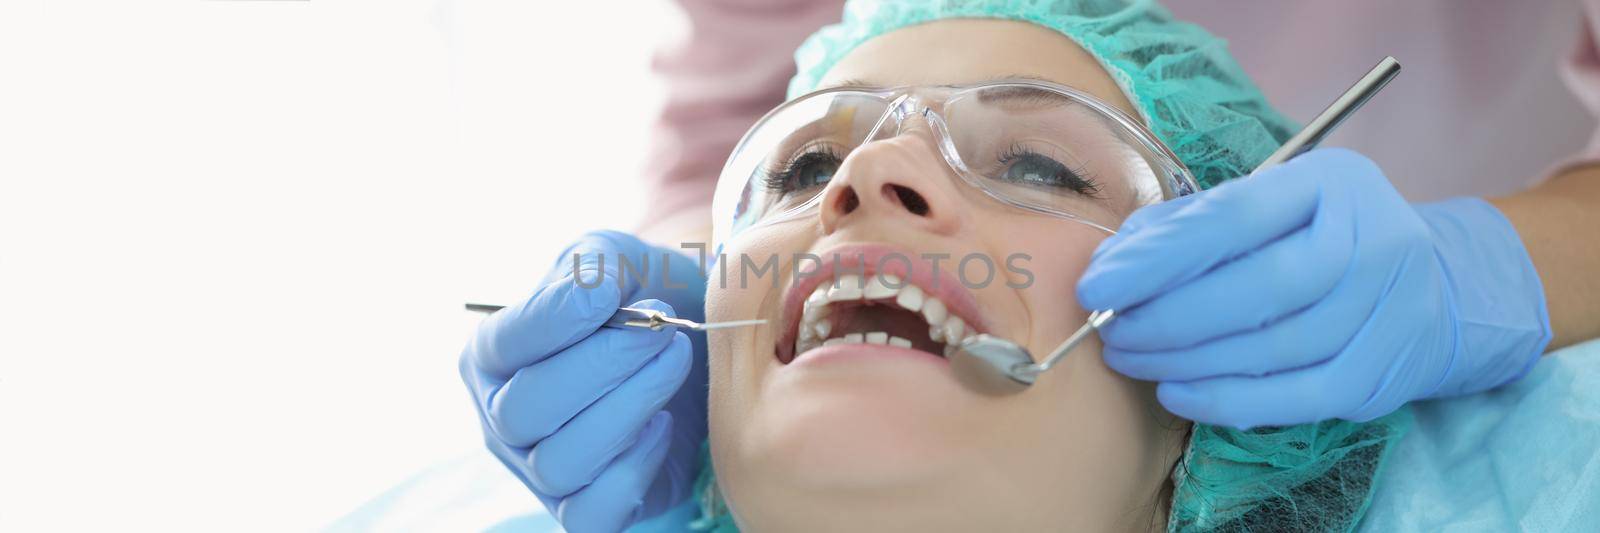 Portrait of woman in dentist chair, appointment at dentist doctor, checkup teeth. Dentist treat teeth with dental instruments. Medicine, teeth care concept